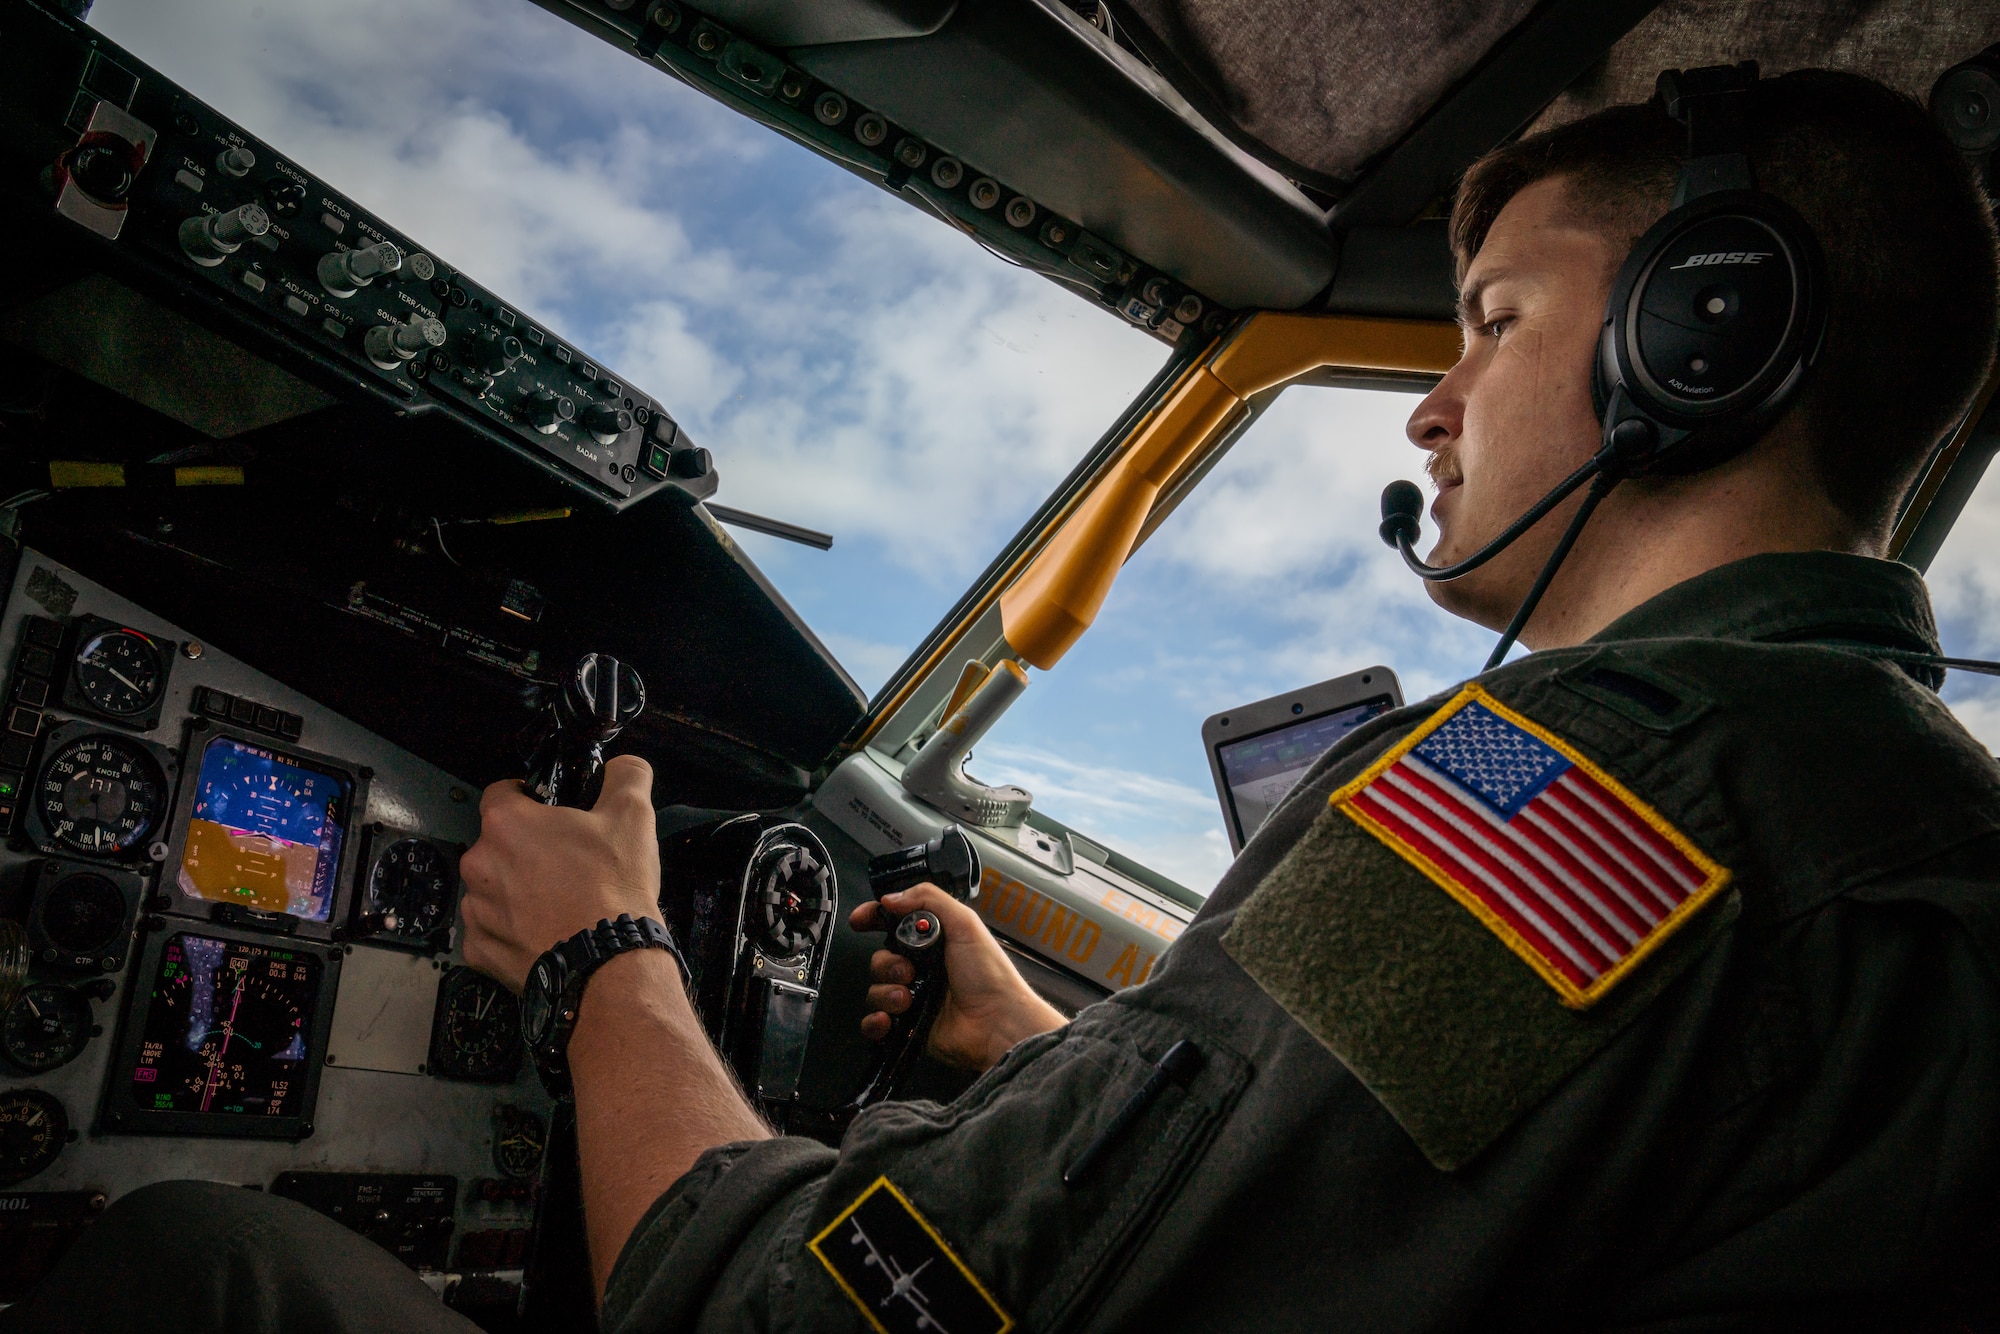 U.S. Air Force 1st Lt. Justin Casey, 91st Air Refueling Squadron pilot, flies a KC-135 Stratotanker aircraft during a refueling exercise over Alabama, Dec. 21, 2021.